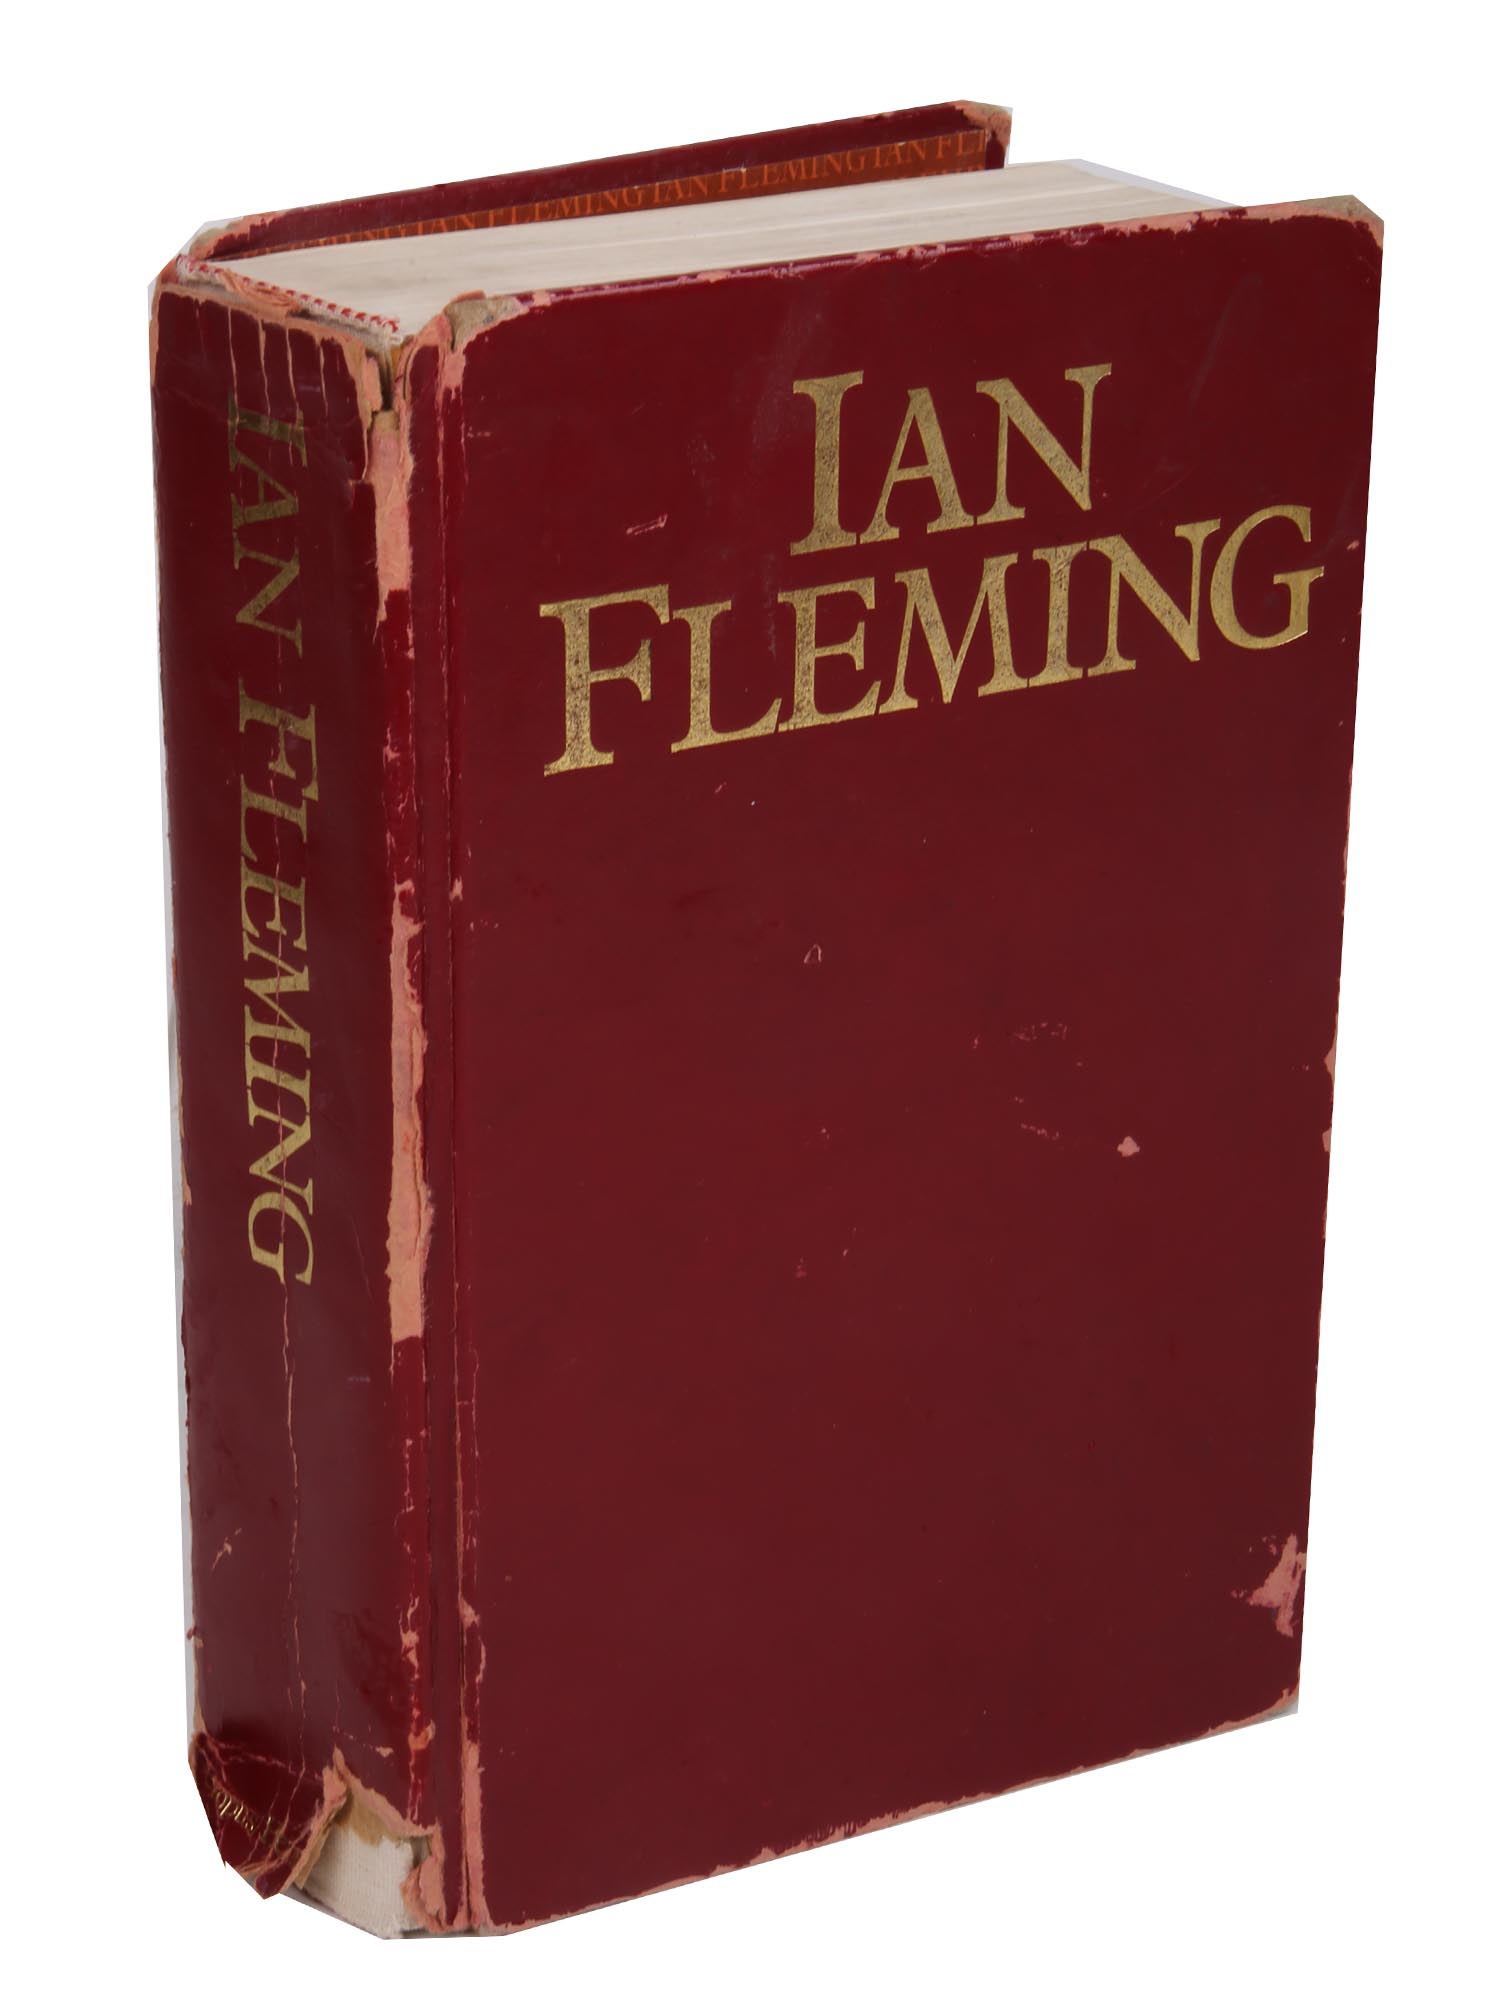 VINTAGE JAMES BOND BOOK BY IAN FLEMING PIC-0